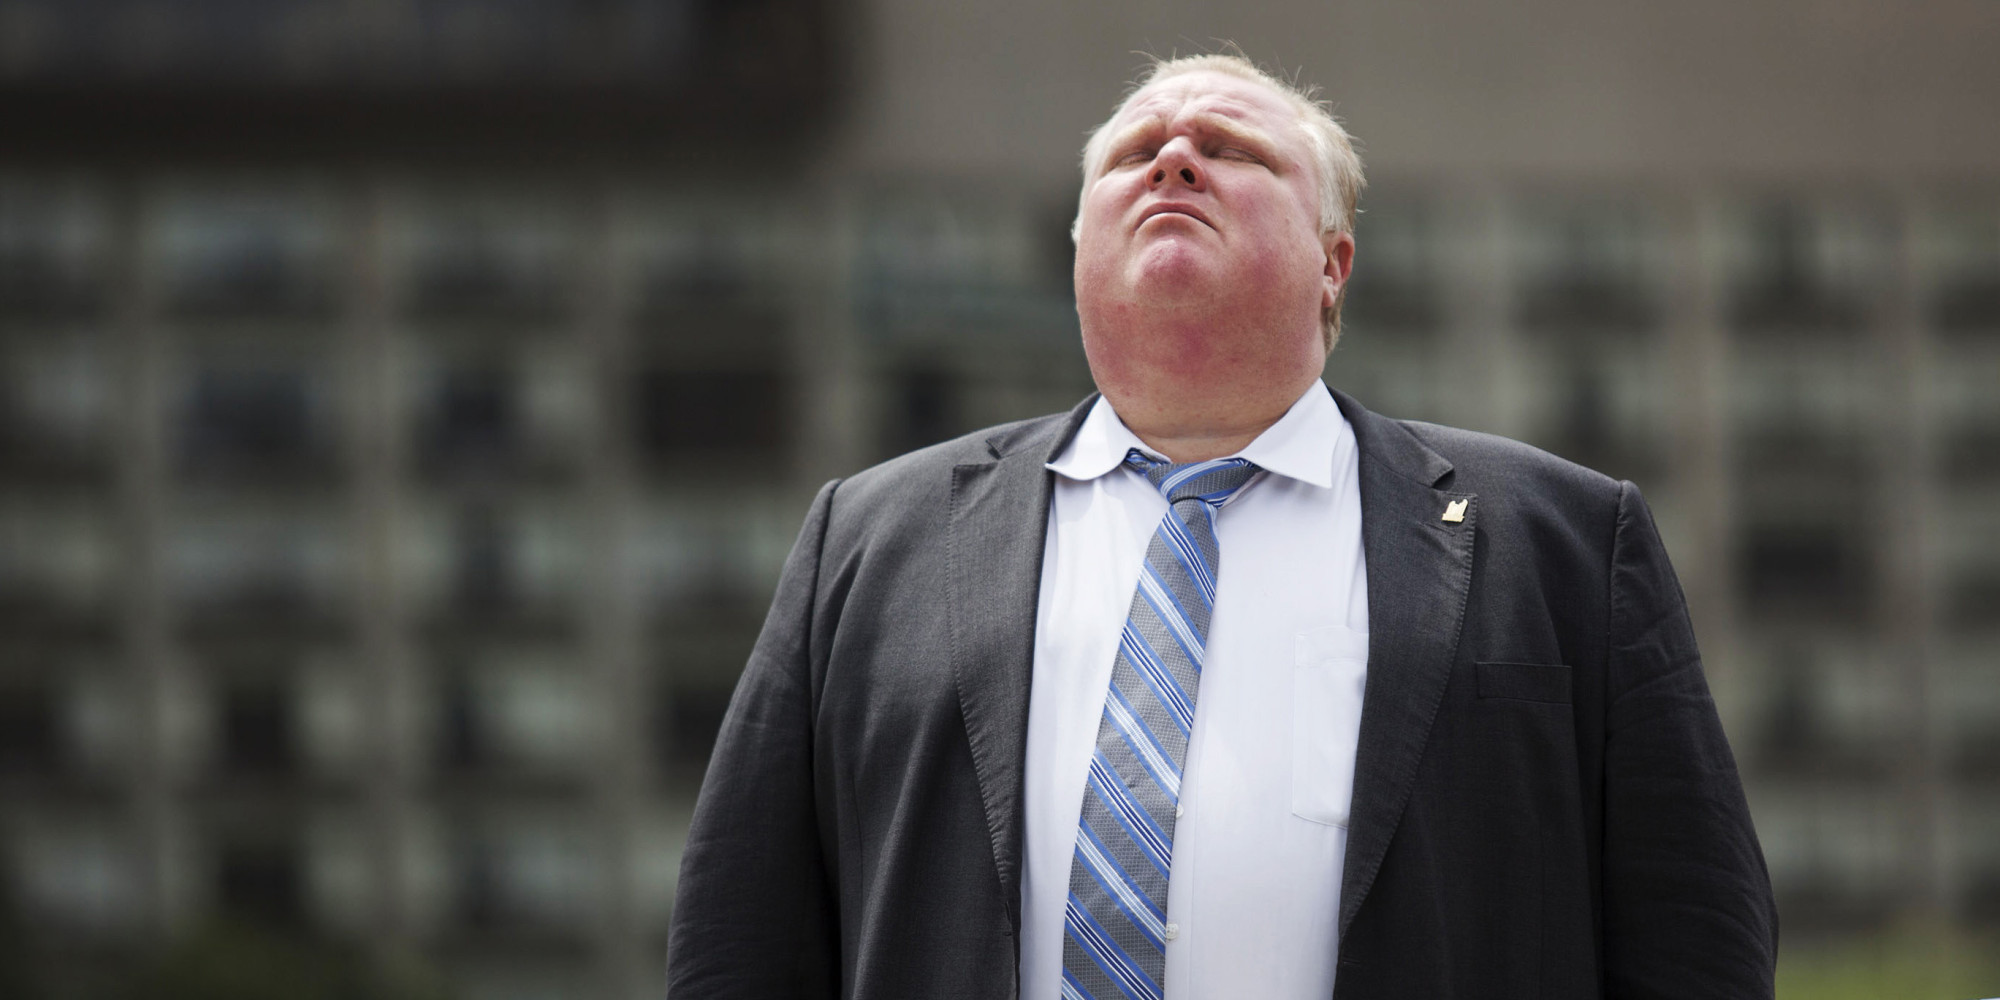 Impeach rob ford petition #1